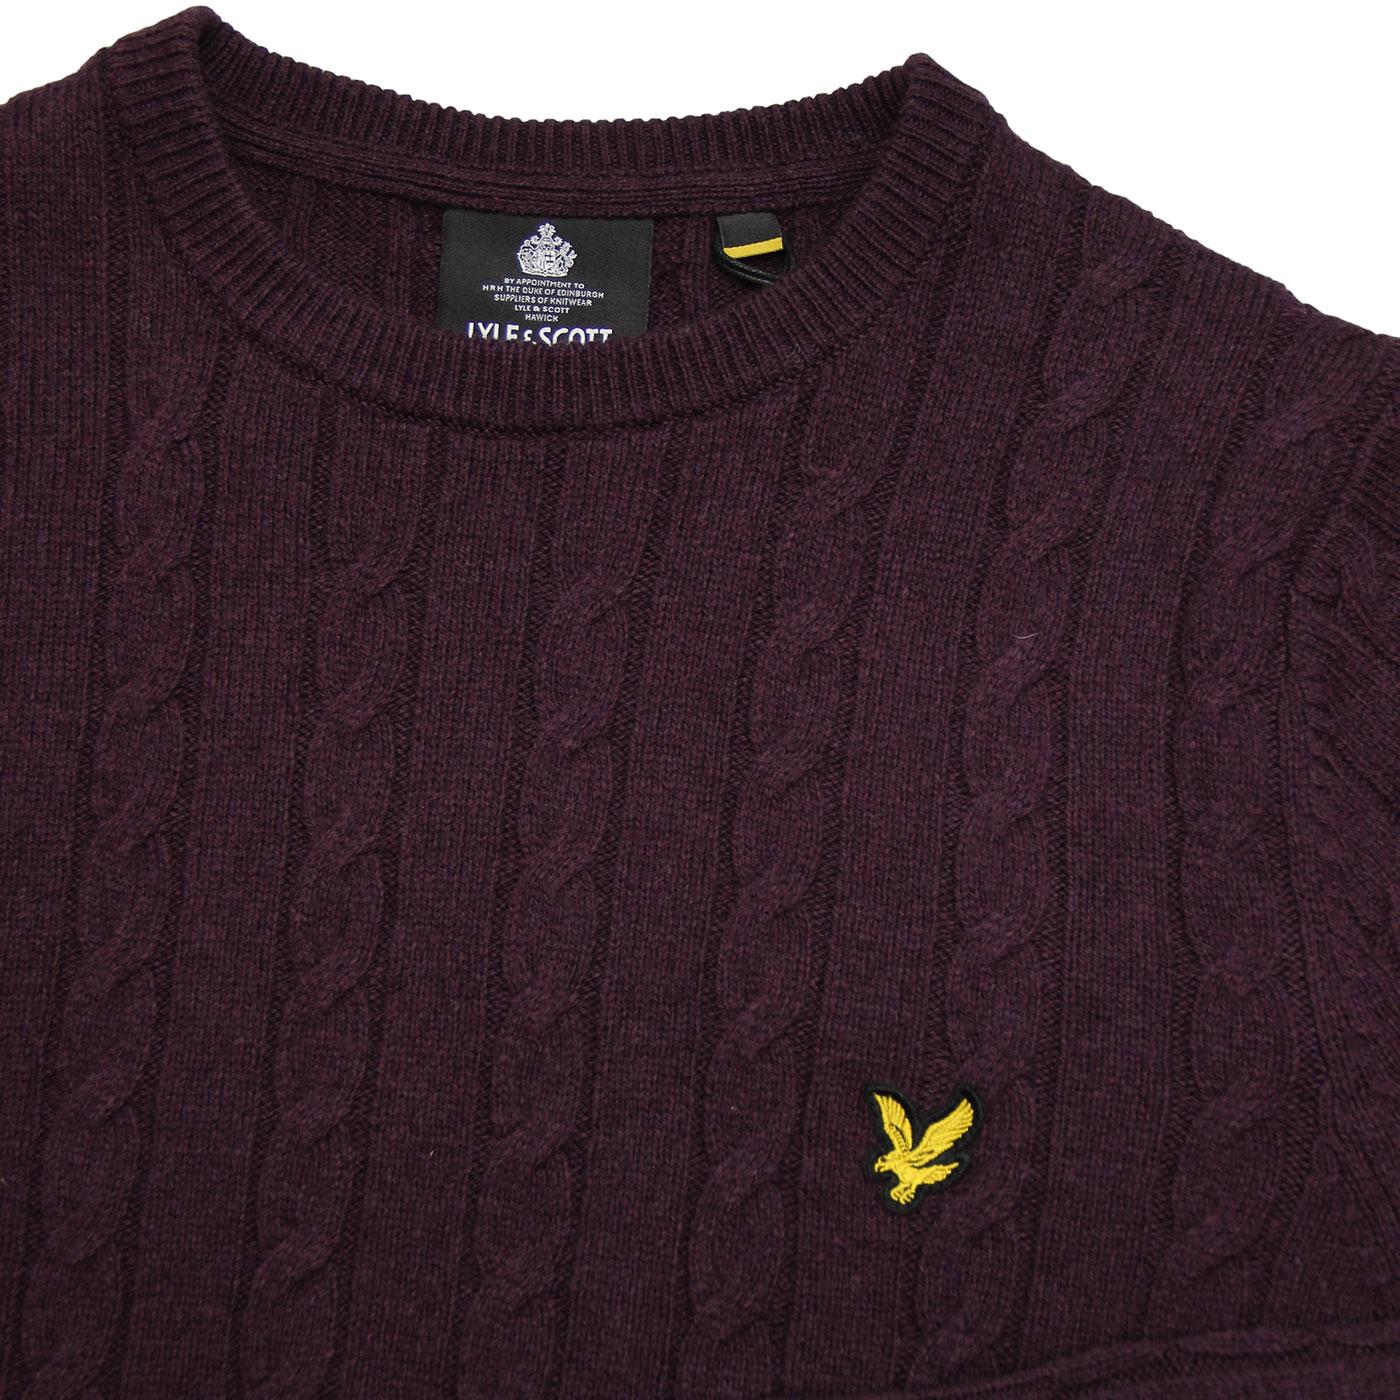 GORGIOUS LYLE AND SCOTT LONG SLEEVE CABLE KNIT JUMPER FOR MEN 